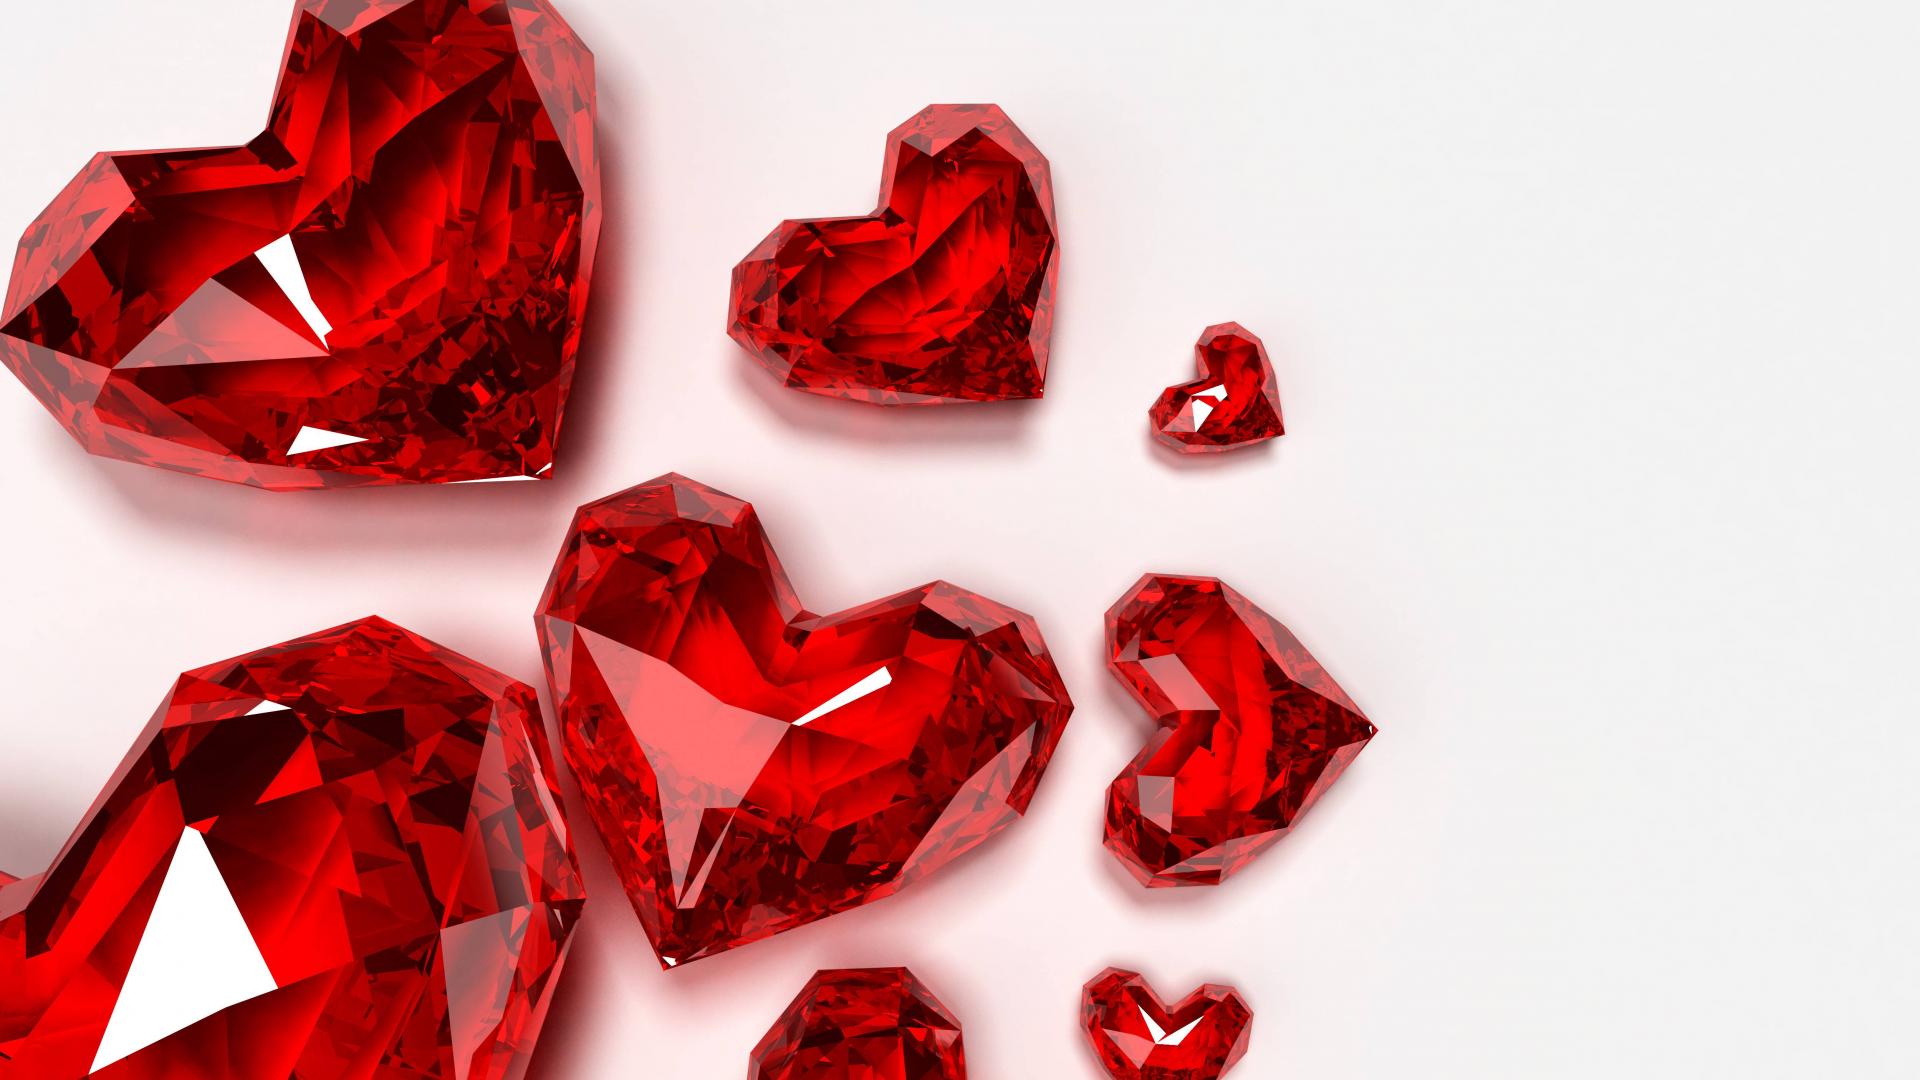 Red crystal crystals hearts wallpaper - (#18121) - High Quality ...